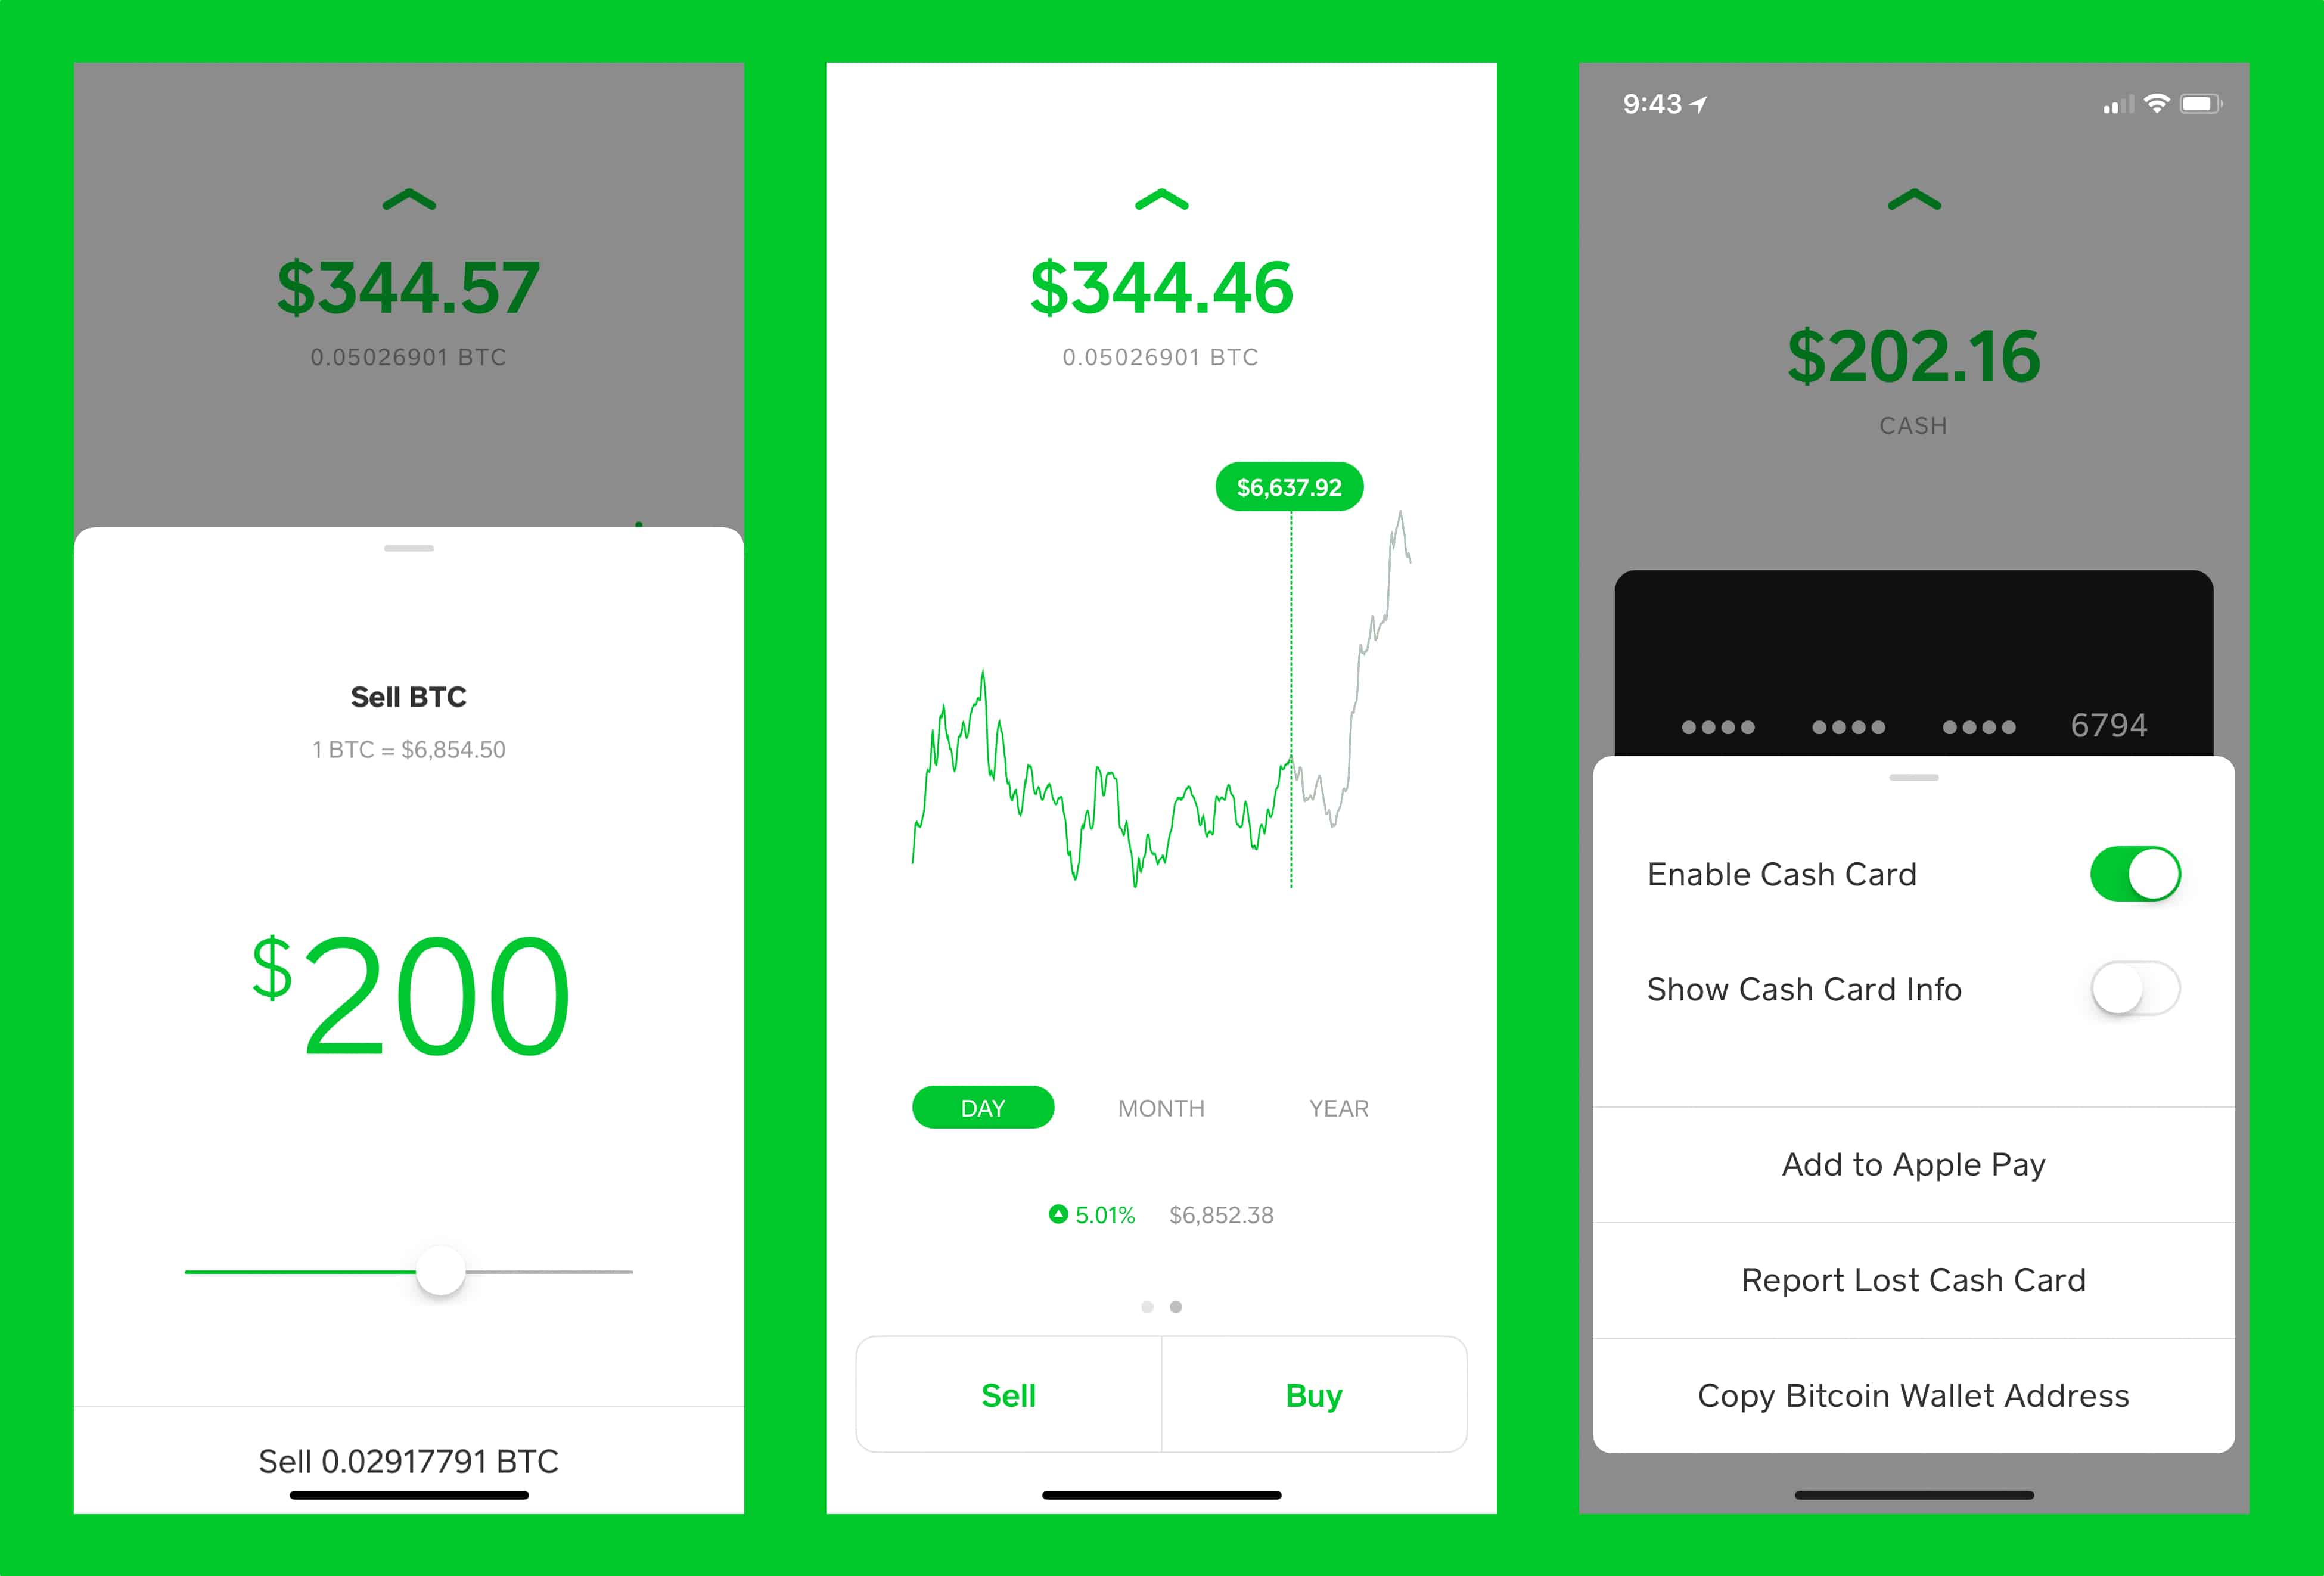 buying bitcoin on cash app reached daily limit of purchases